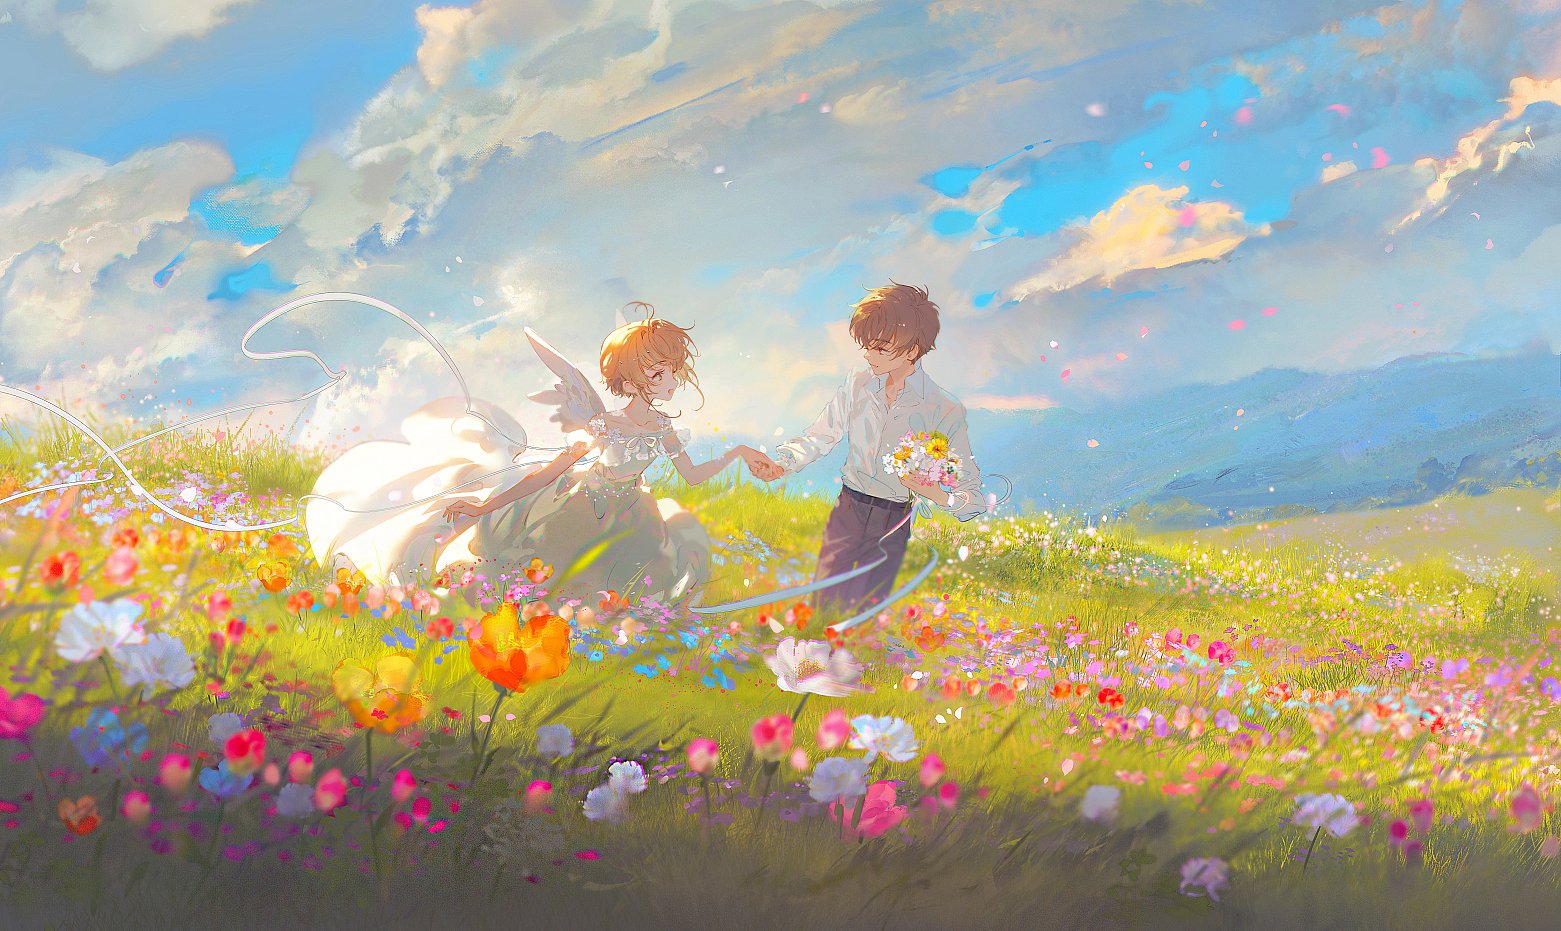 Anime Boys Anime Girls Flowers Grass Sky Clouds Holding Hands Wings Dress 1561x931